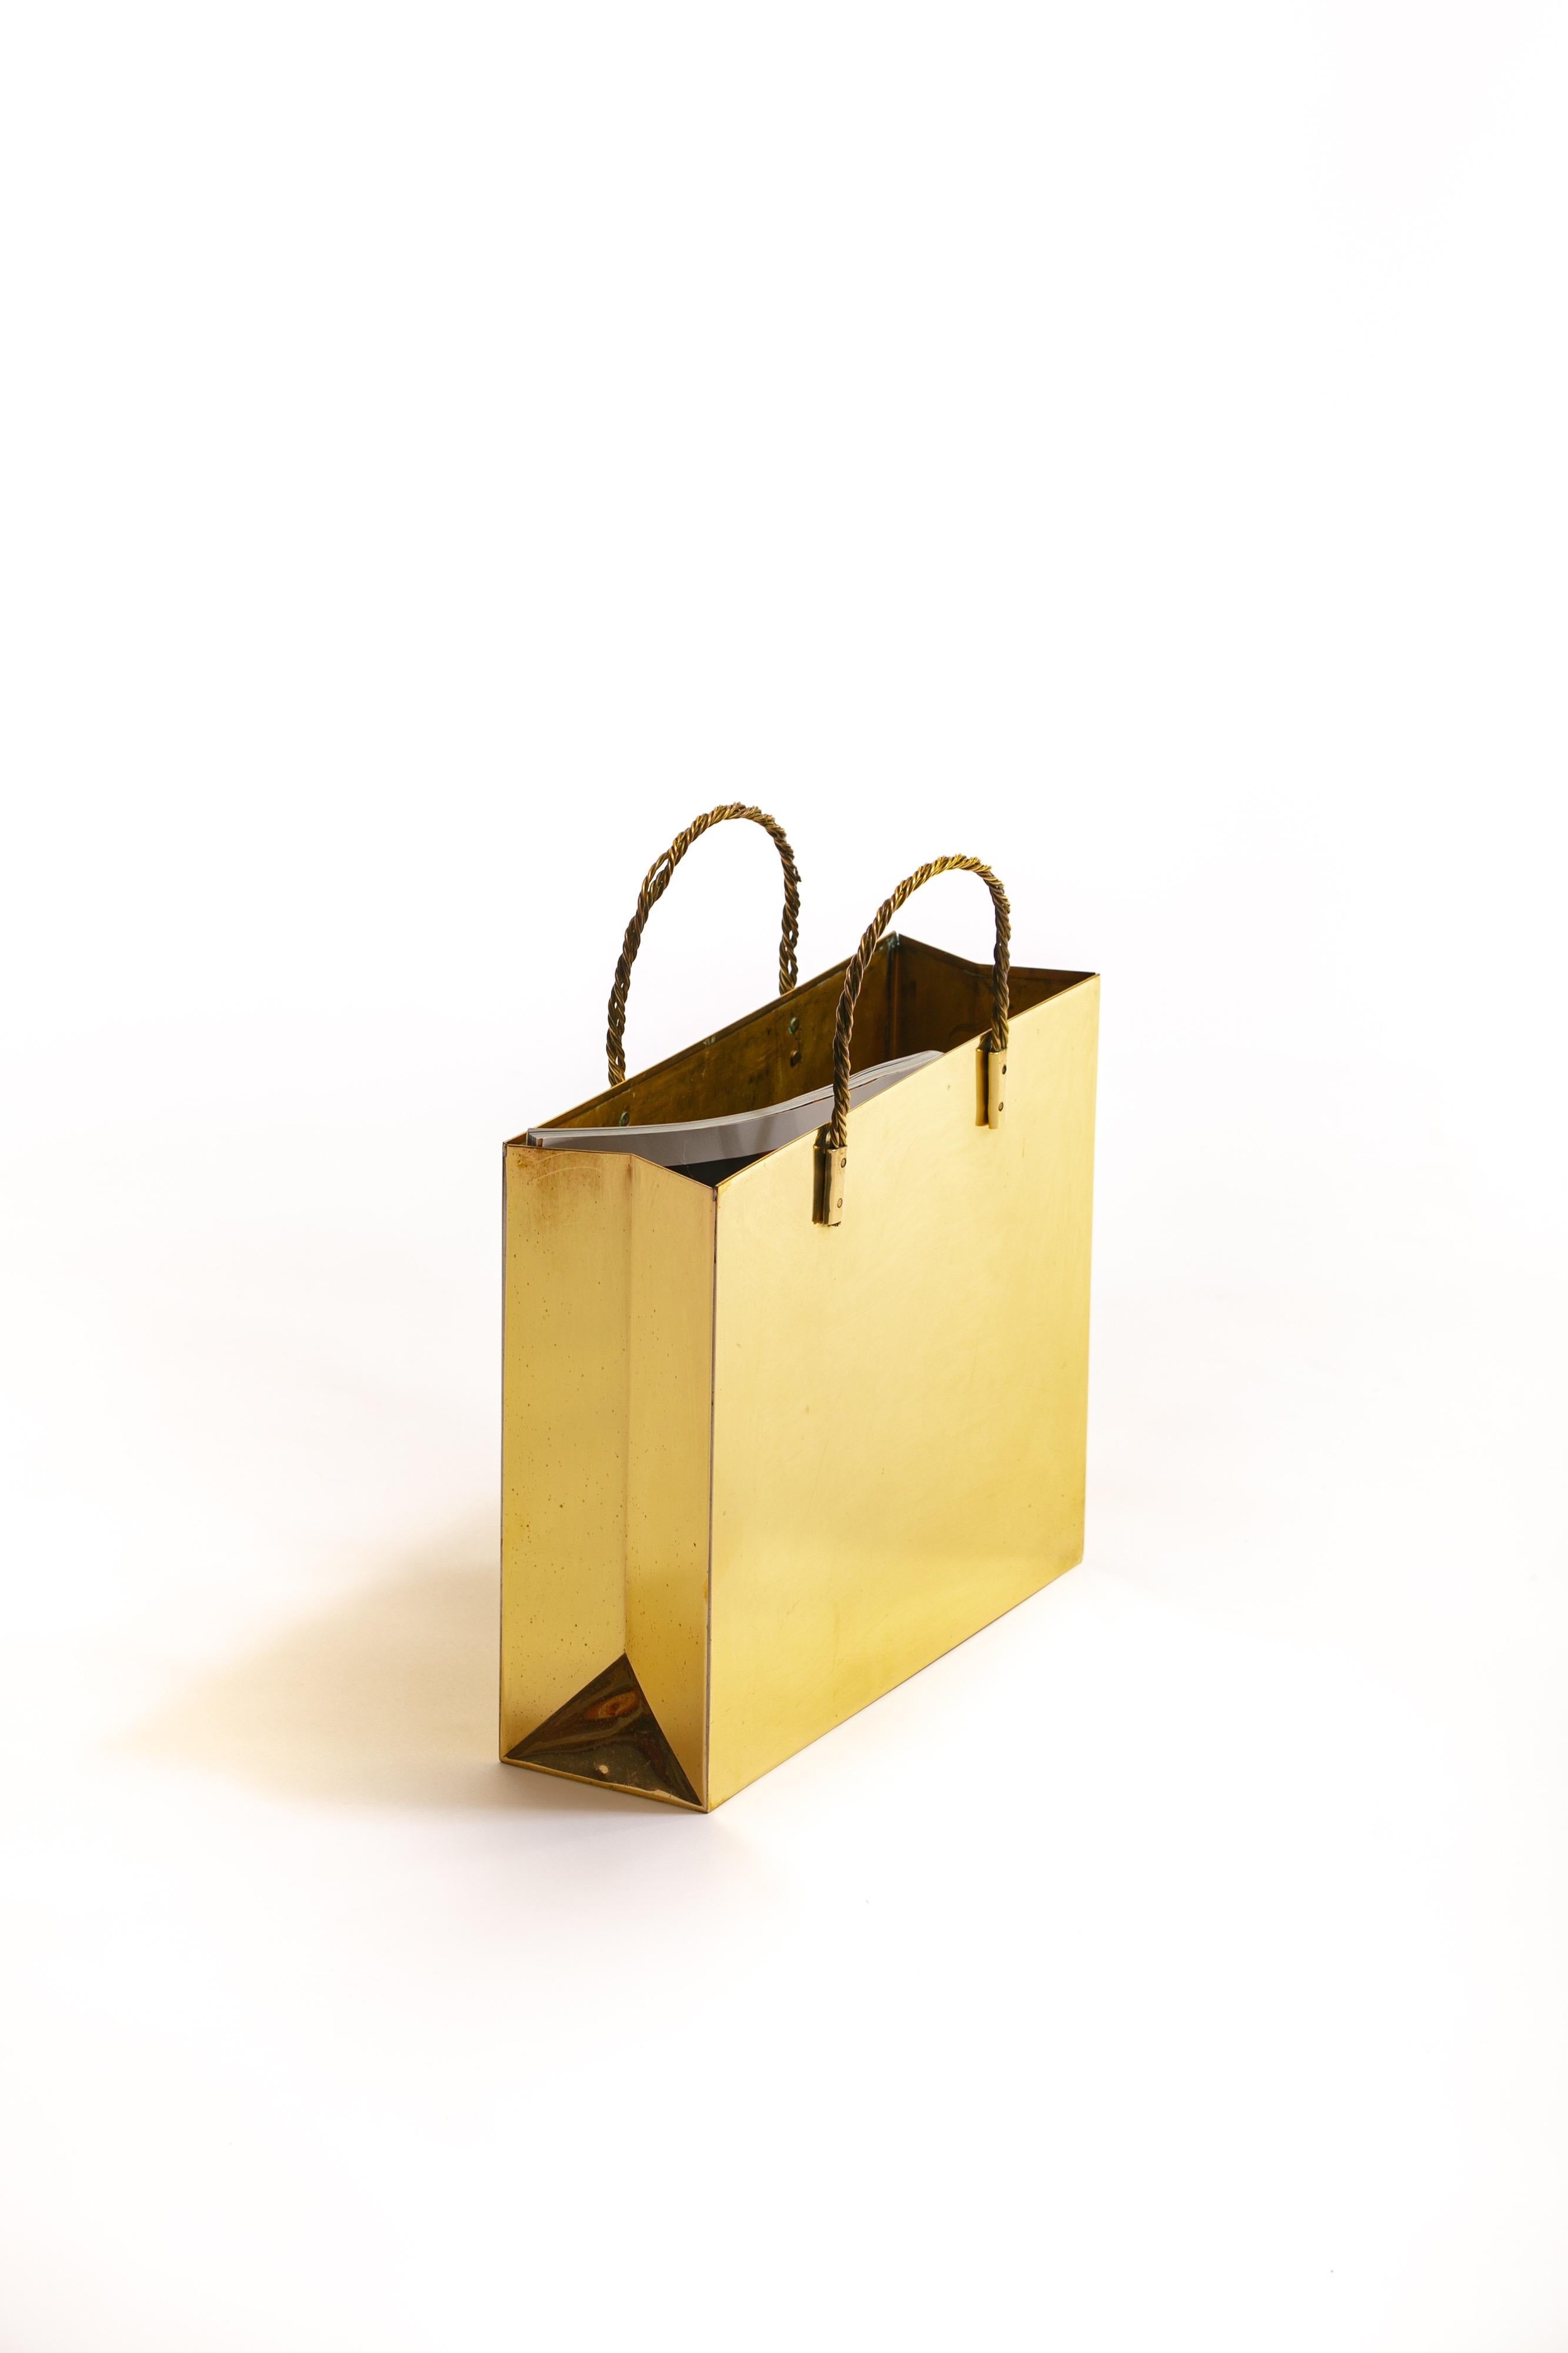 Late 20th Century Italian Midcentury Brass Shopping Bag Tote in the Manner of Gio Ponti circa 1950